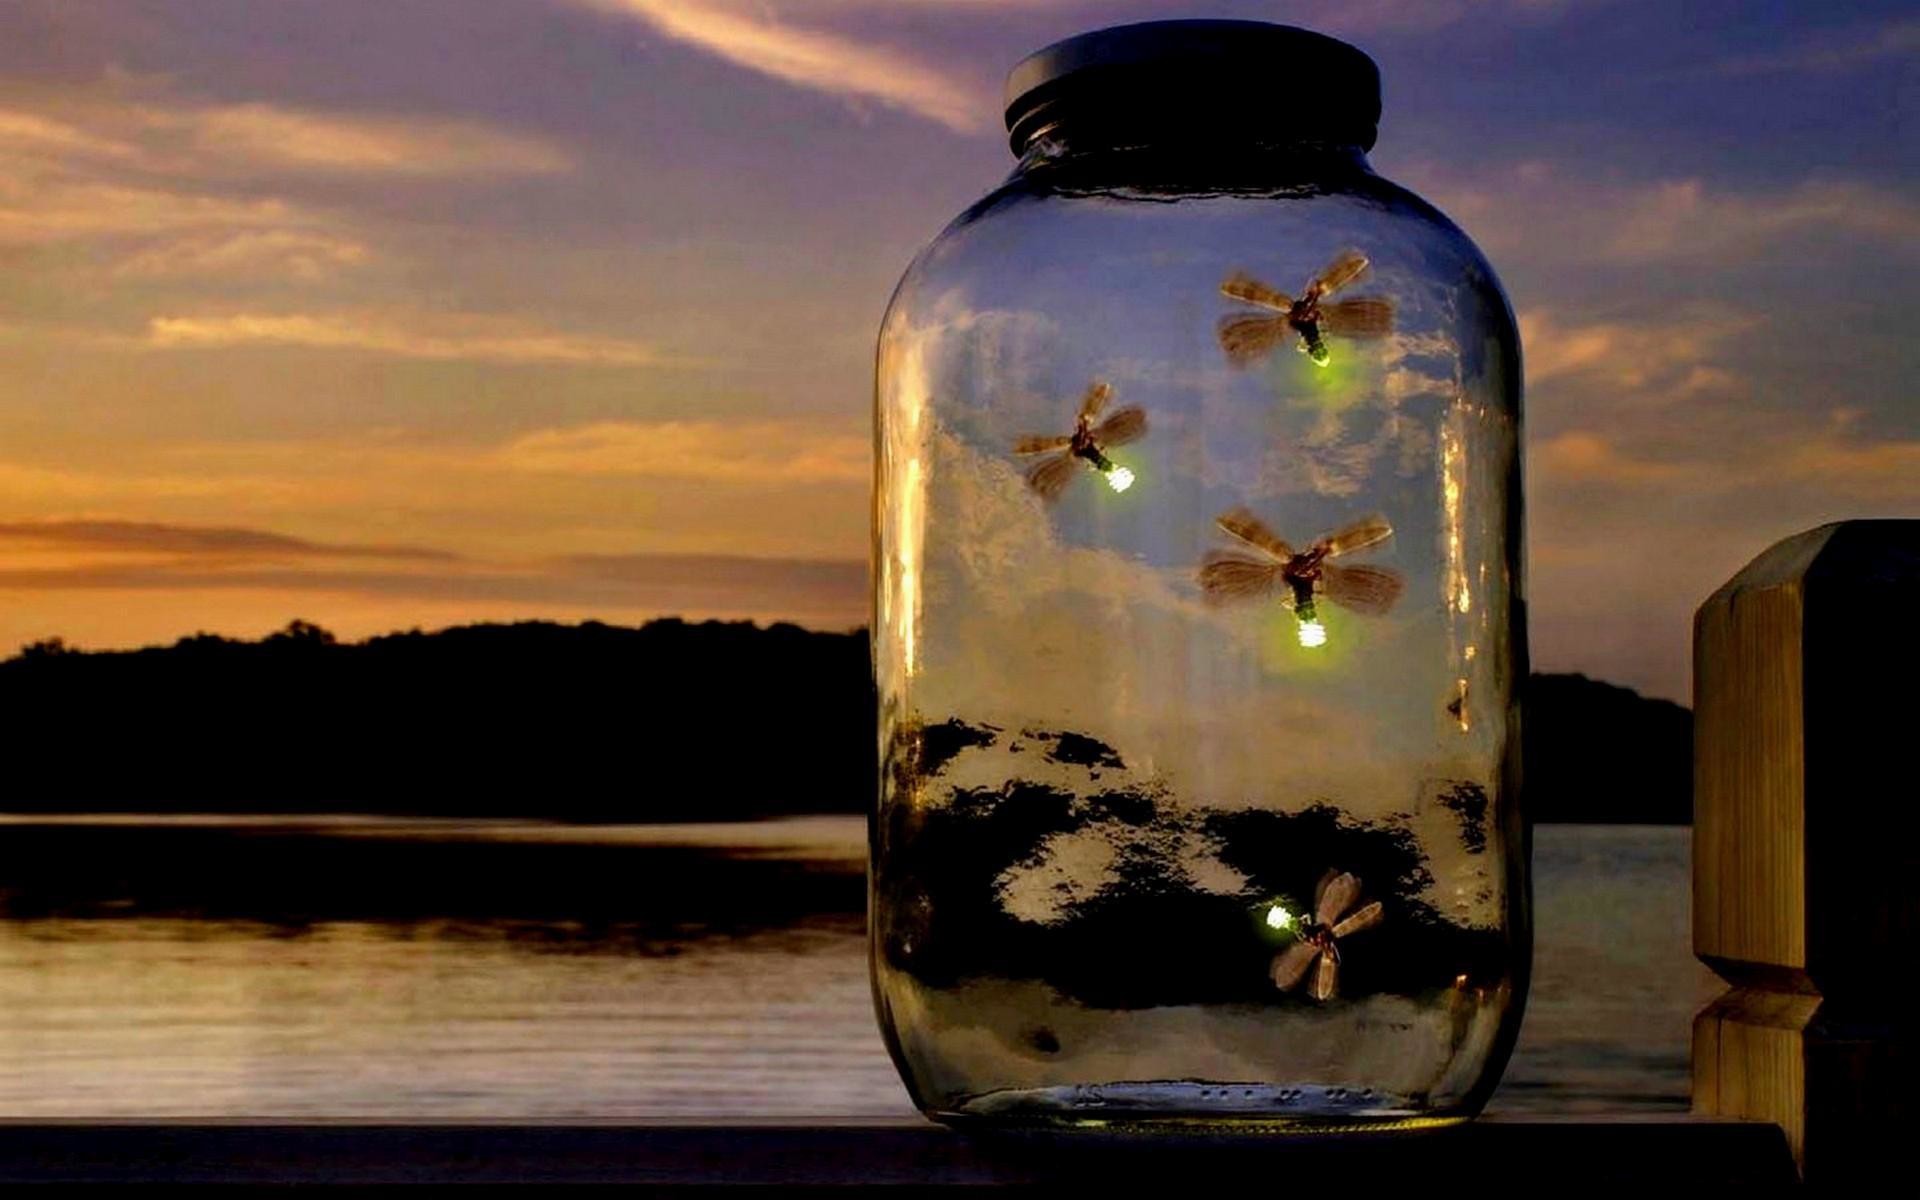 1920x1200 wallpaper.wiki-Trapped-Fireflies-in-Jar-PIC-WPB004812